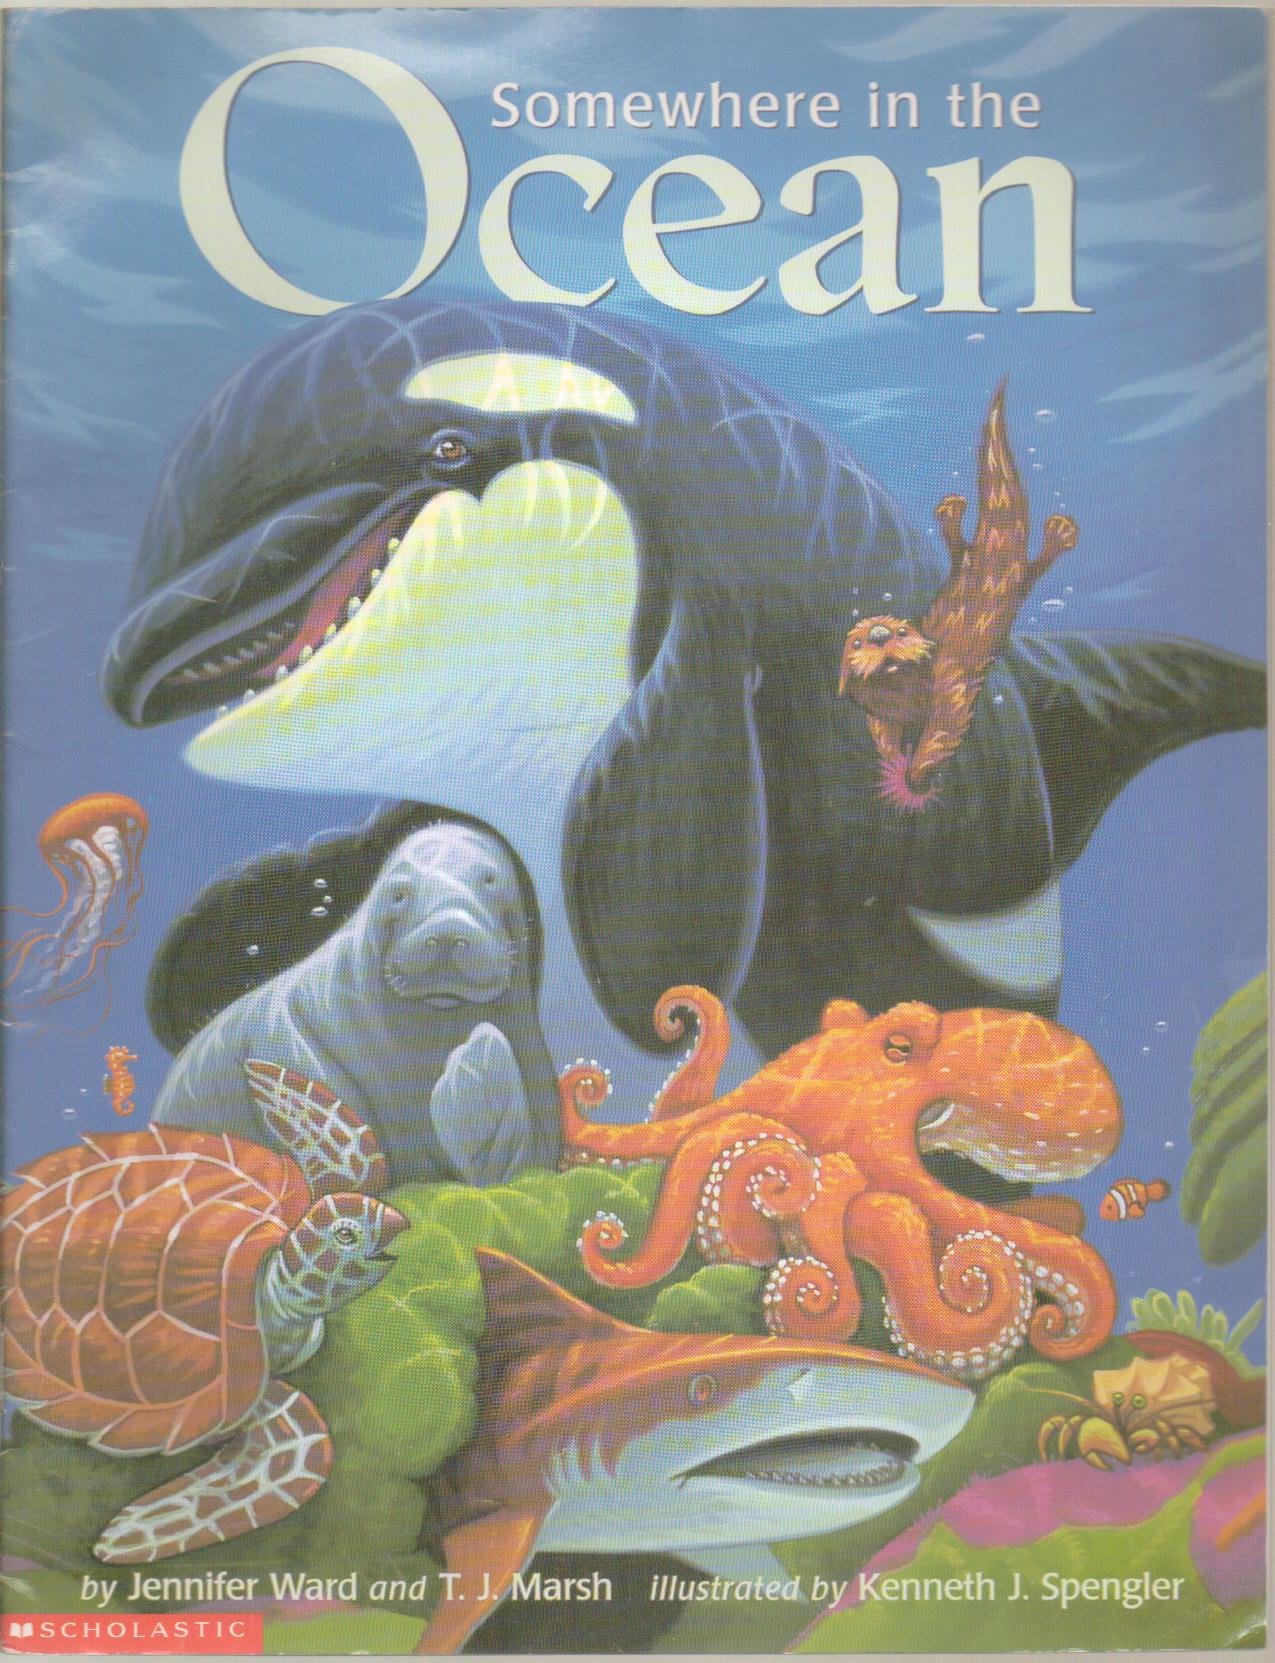 Cover image of "Somewhere in the Ocean" featuring an illustration of a smiling killer whale and about 8 other sea animals